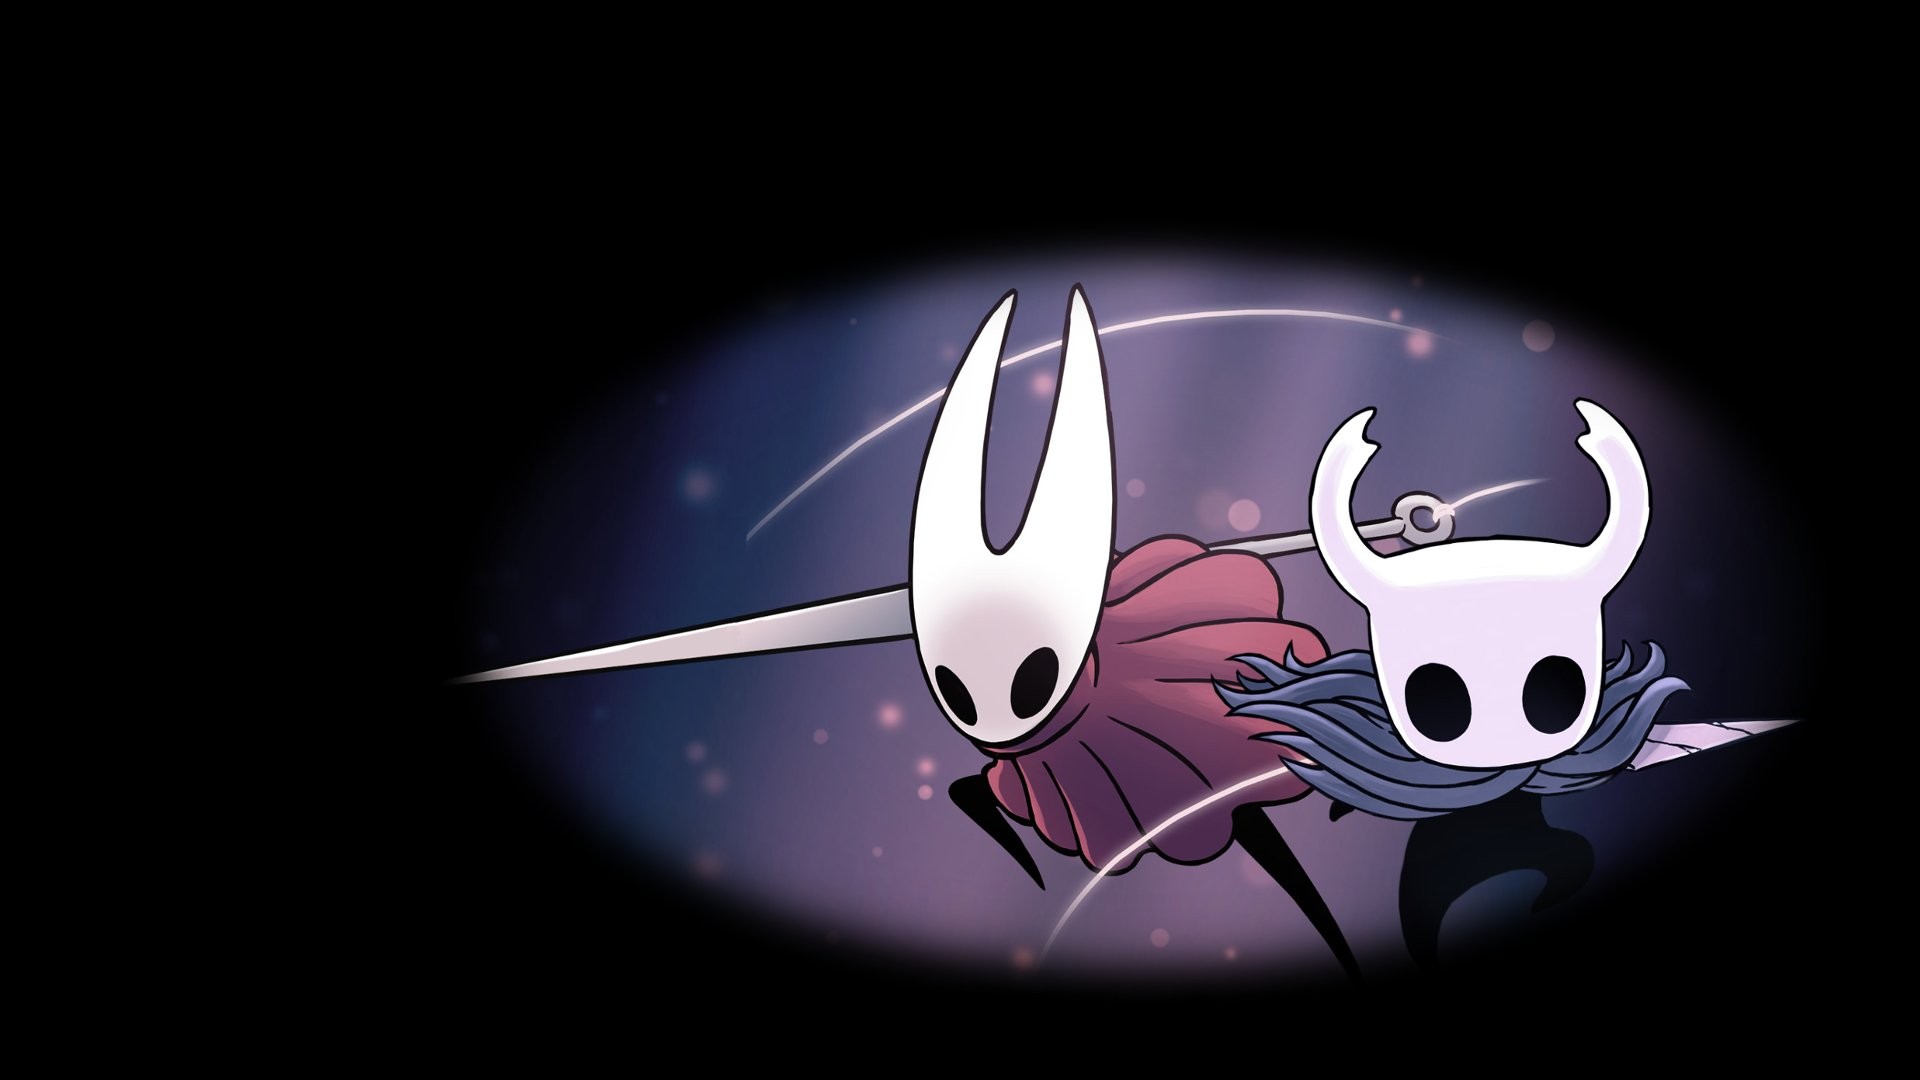 Wallpaper Hollow Knight Game HD with high-resolution 1920x1080 pixel. You can use this wallpaper for your Windows and Mac OS computers as well as your Android and iPhone smartphones